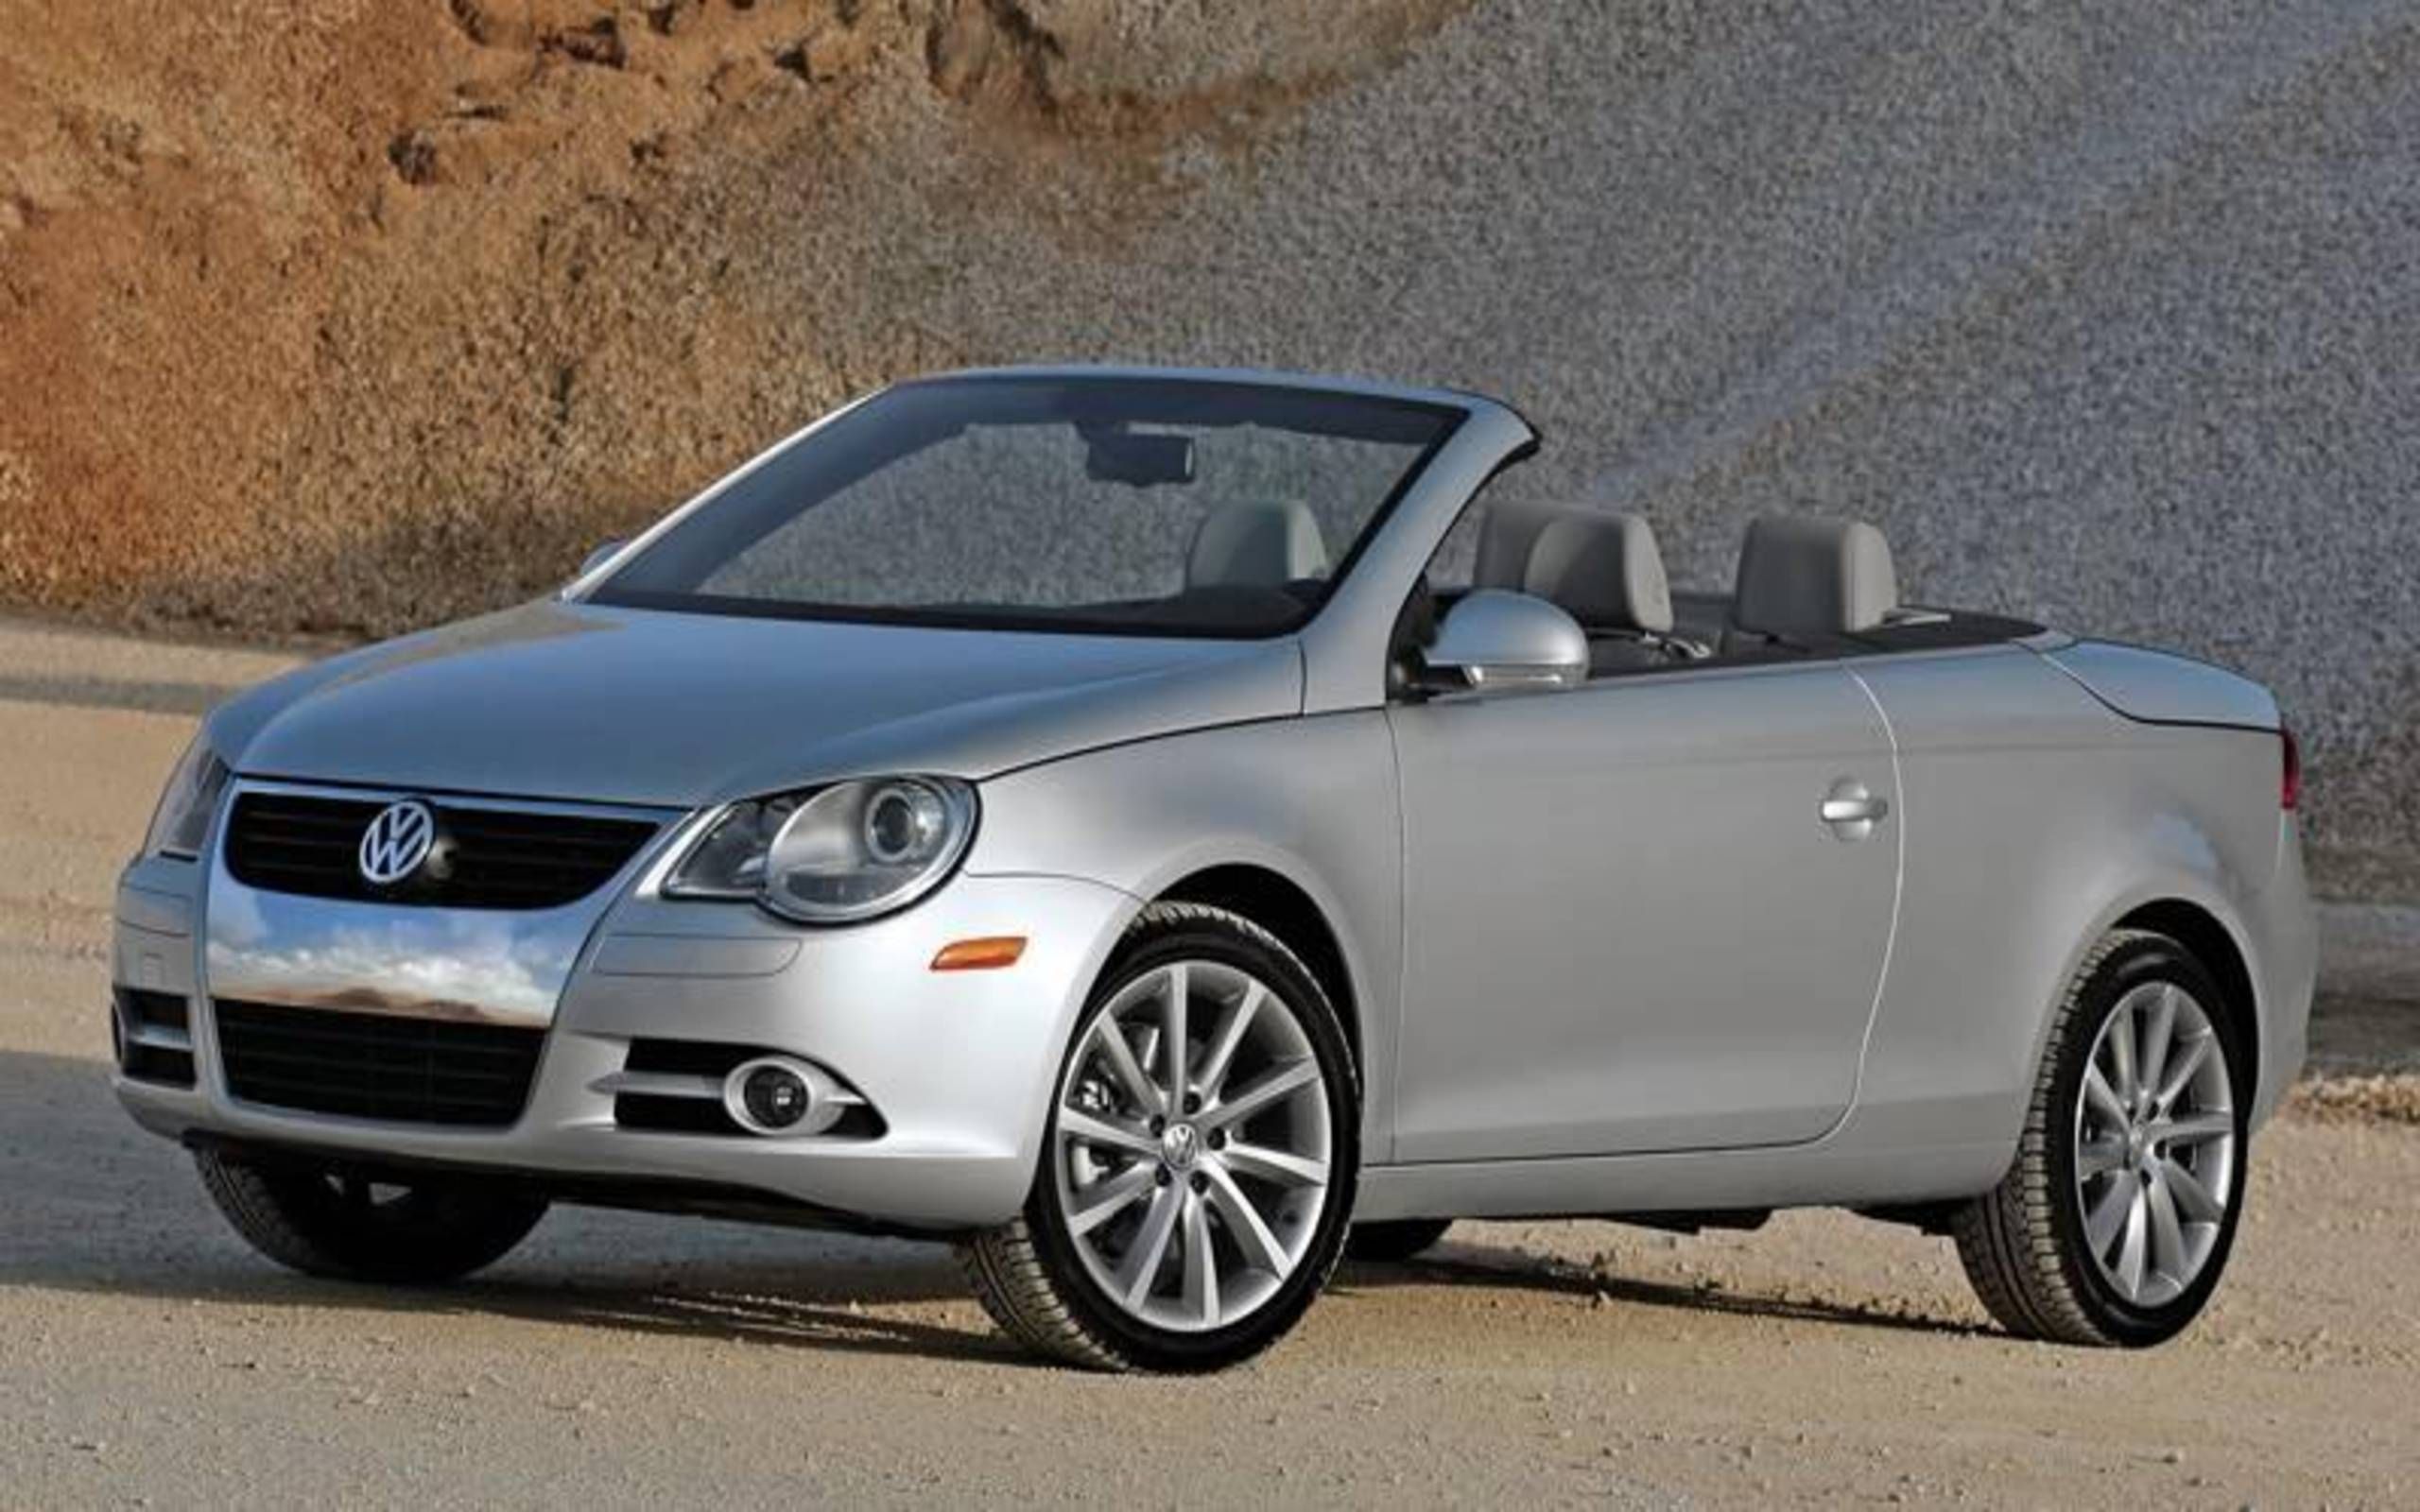 2007 Volkswagen Eos: Bigger engine gives VW Eos some punch